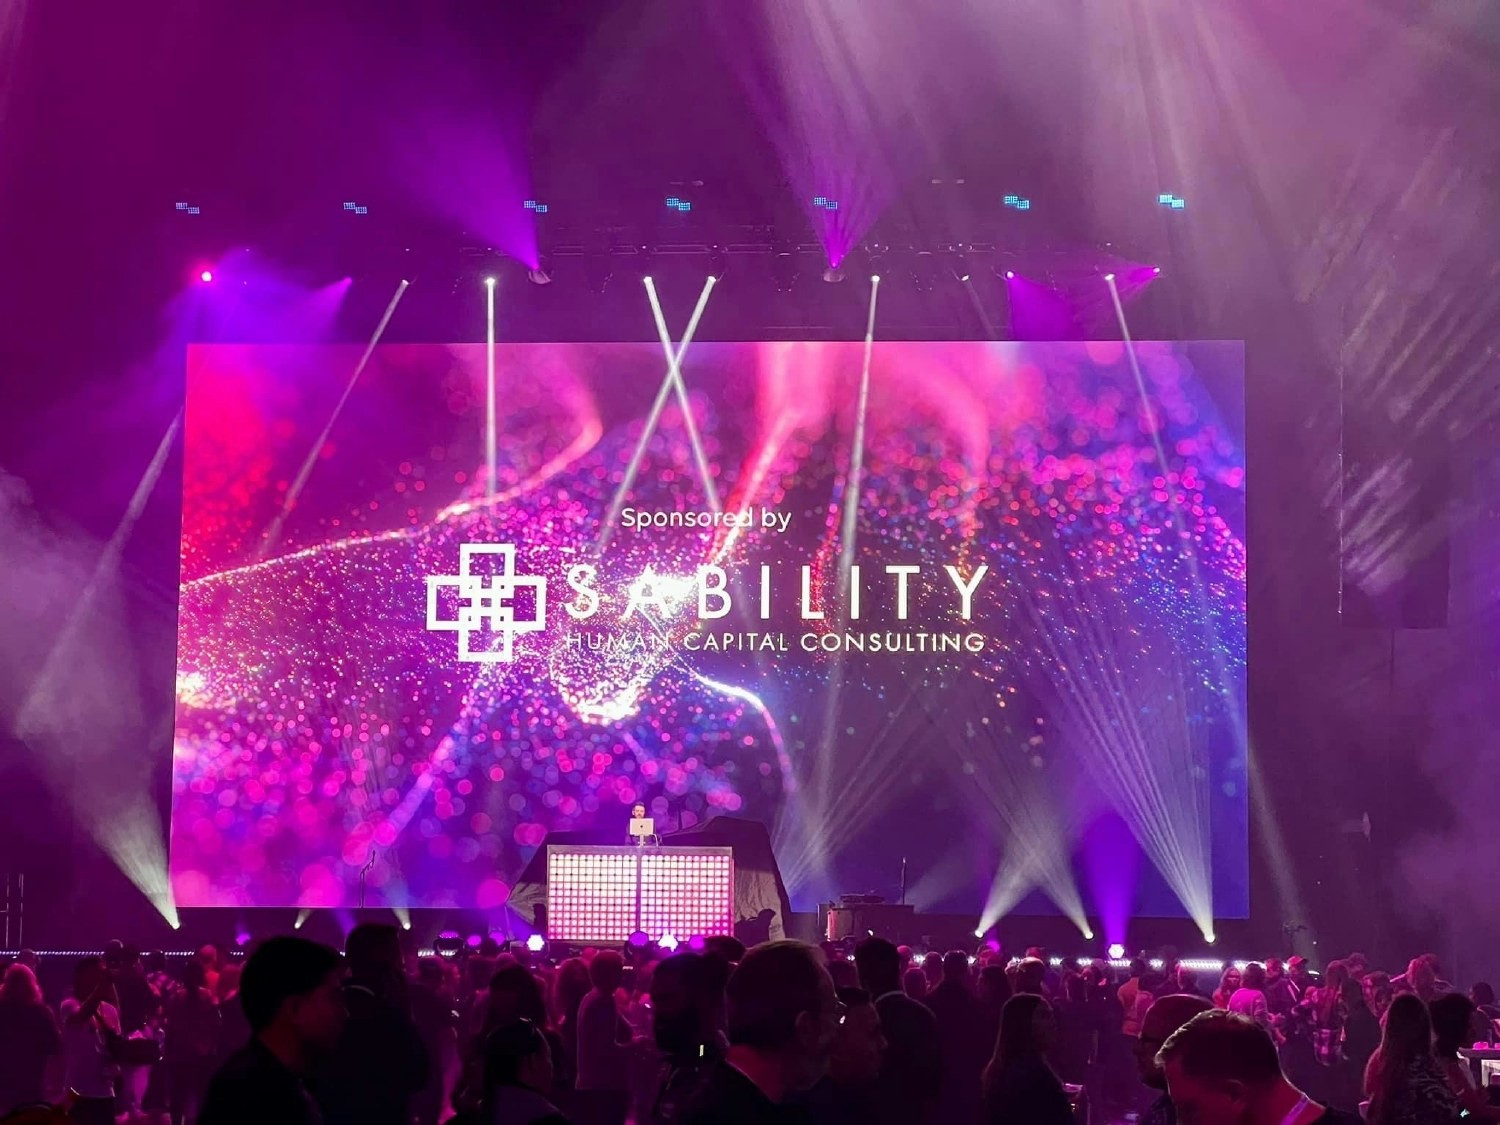 Sability in lights as the sponsor of the 2022 UKG Aspire Conference Customer Party, featuring Imagine Dragons.